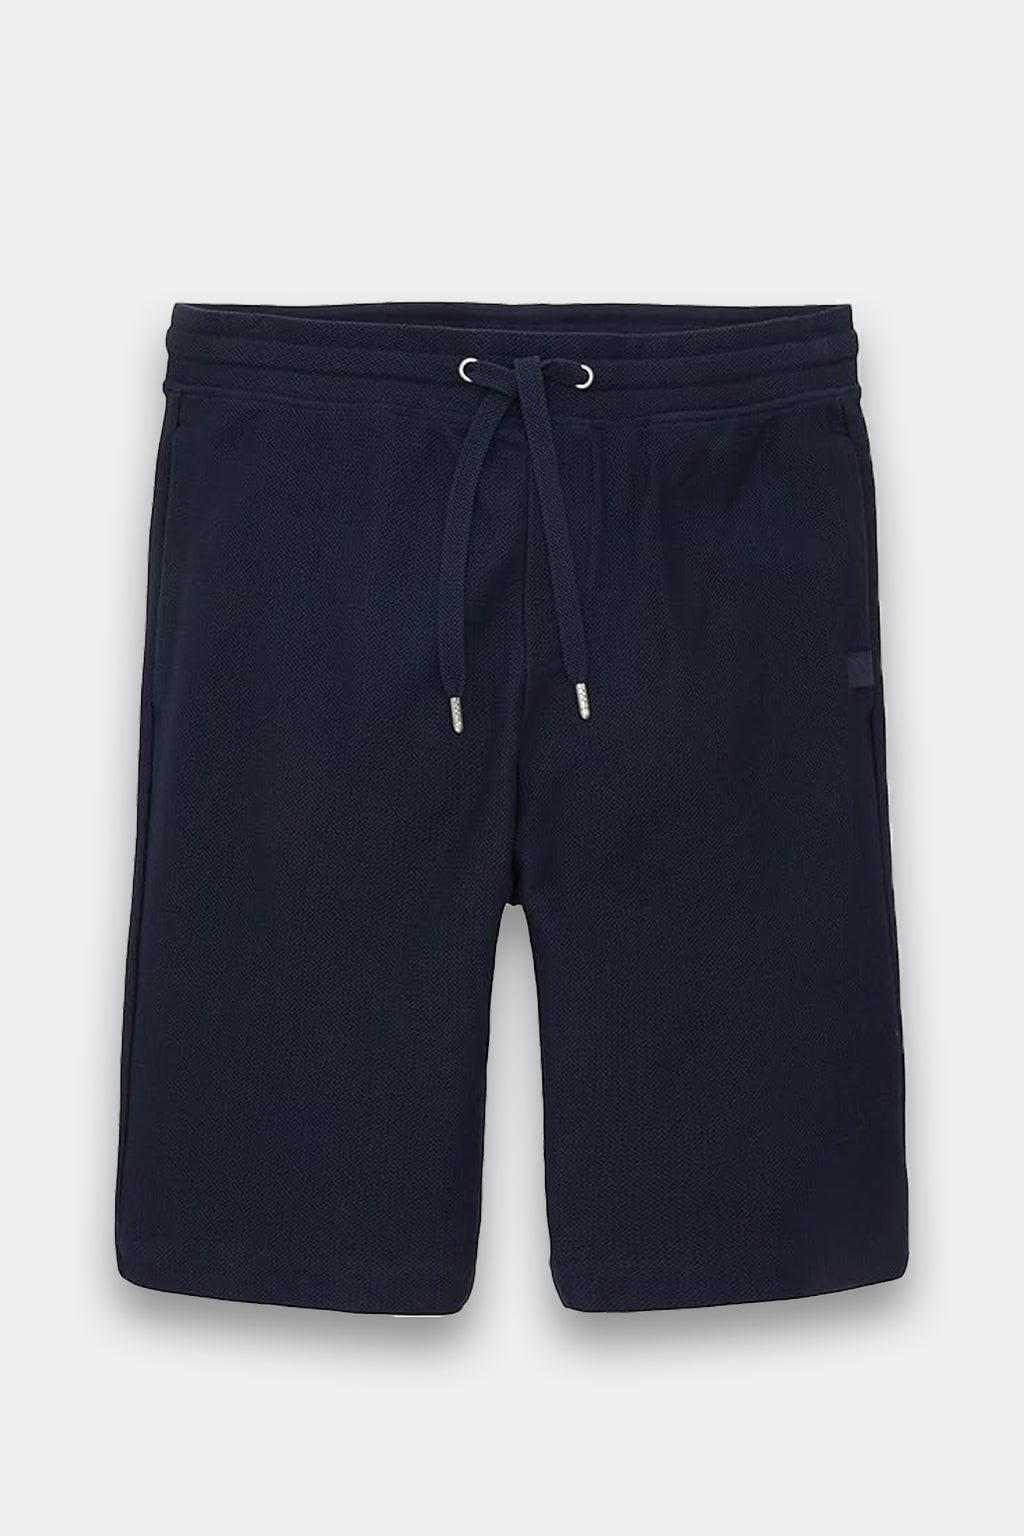 Tom Tailor - Structured sweat short